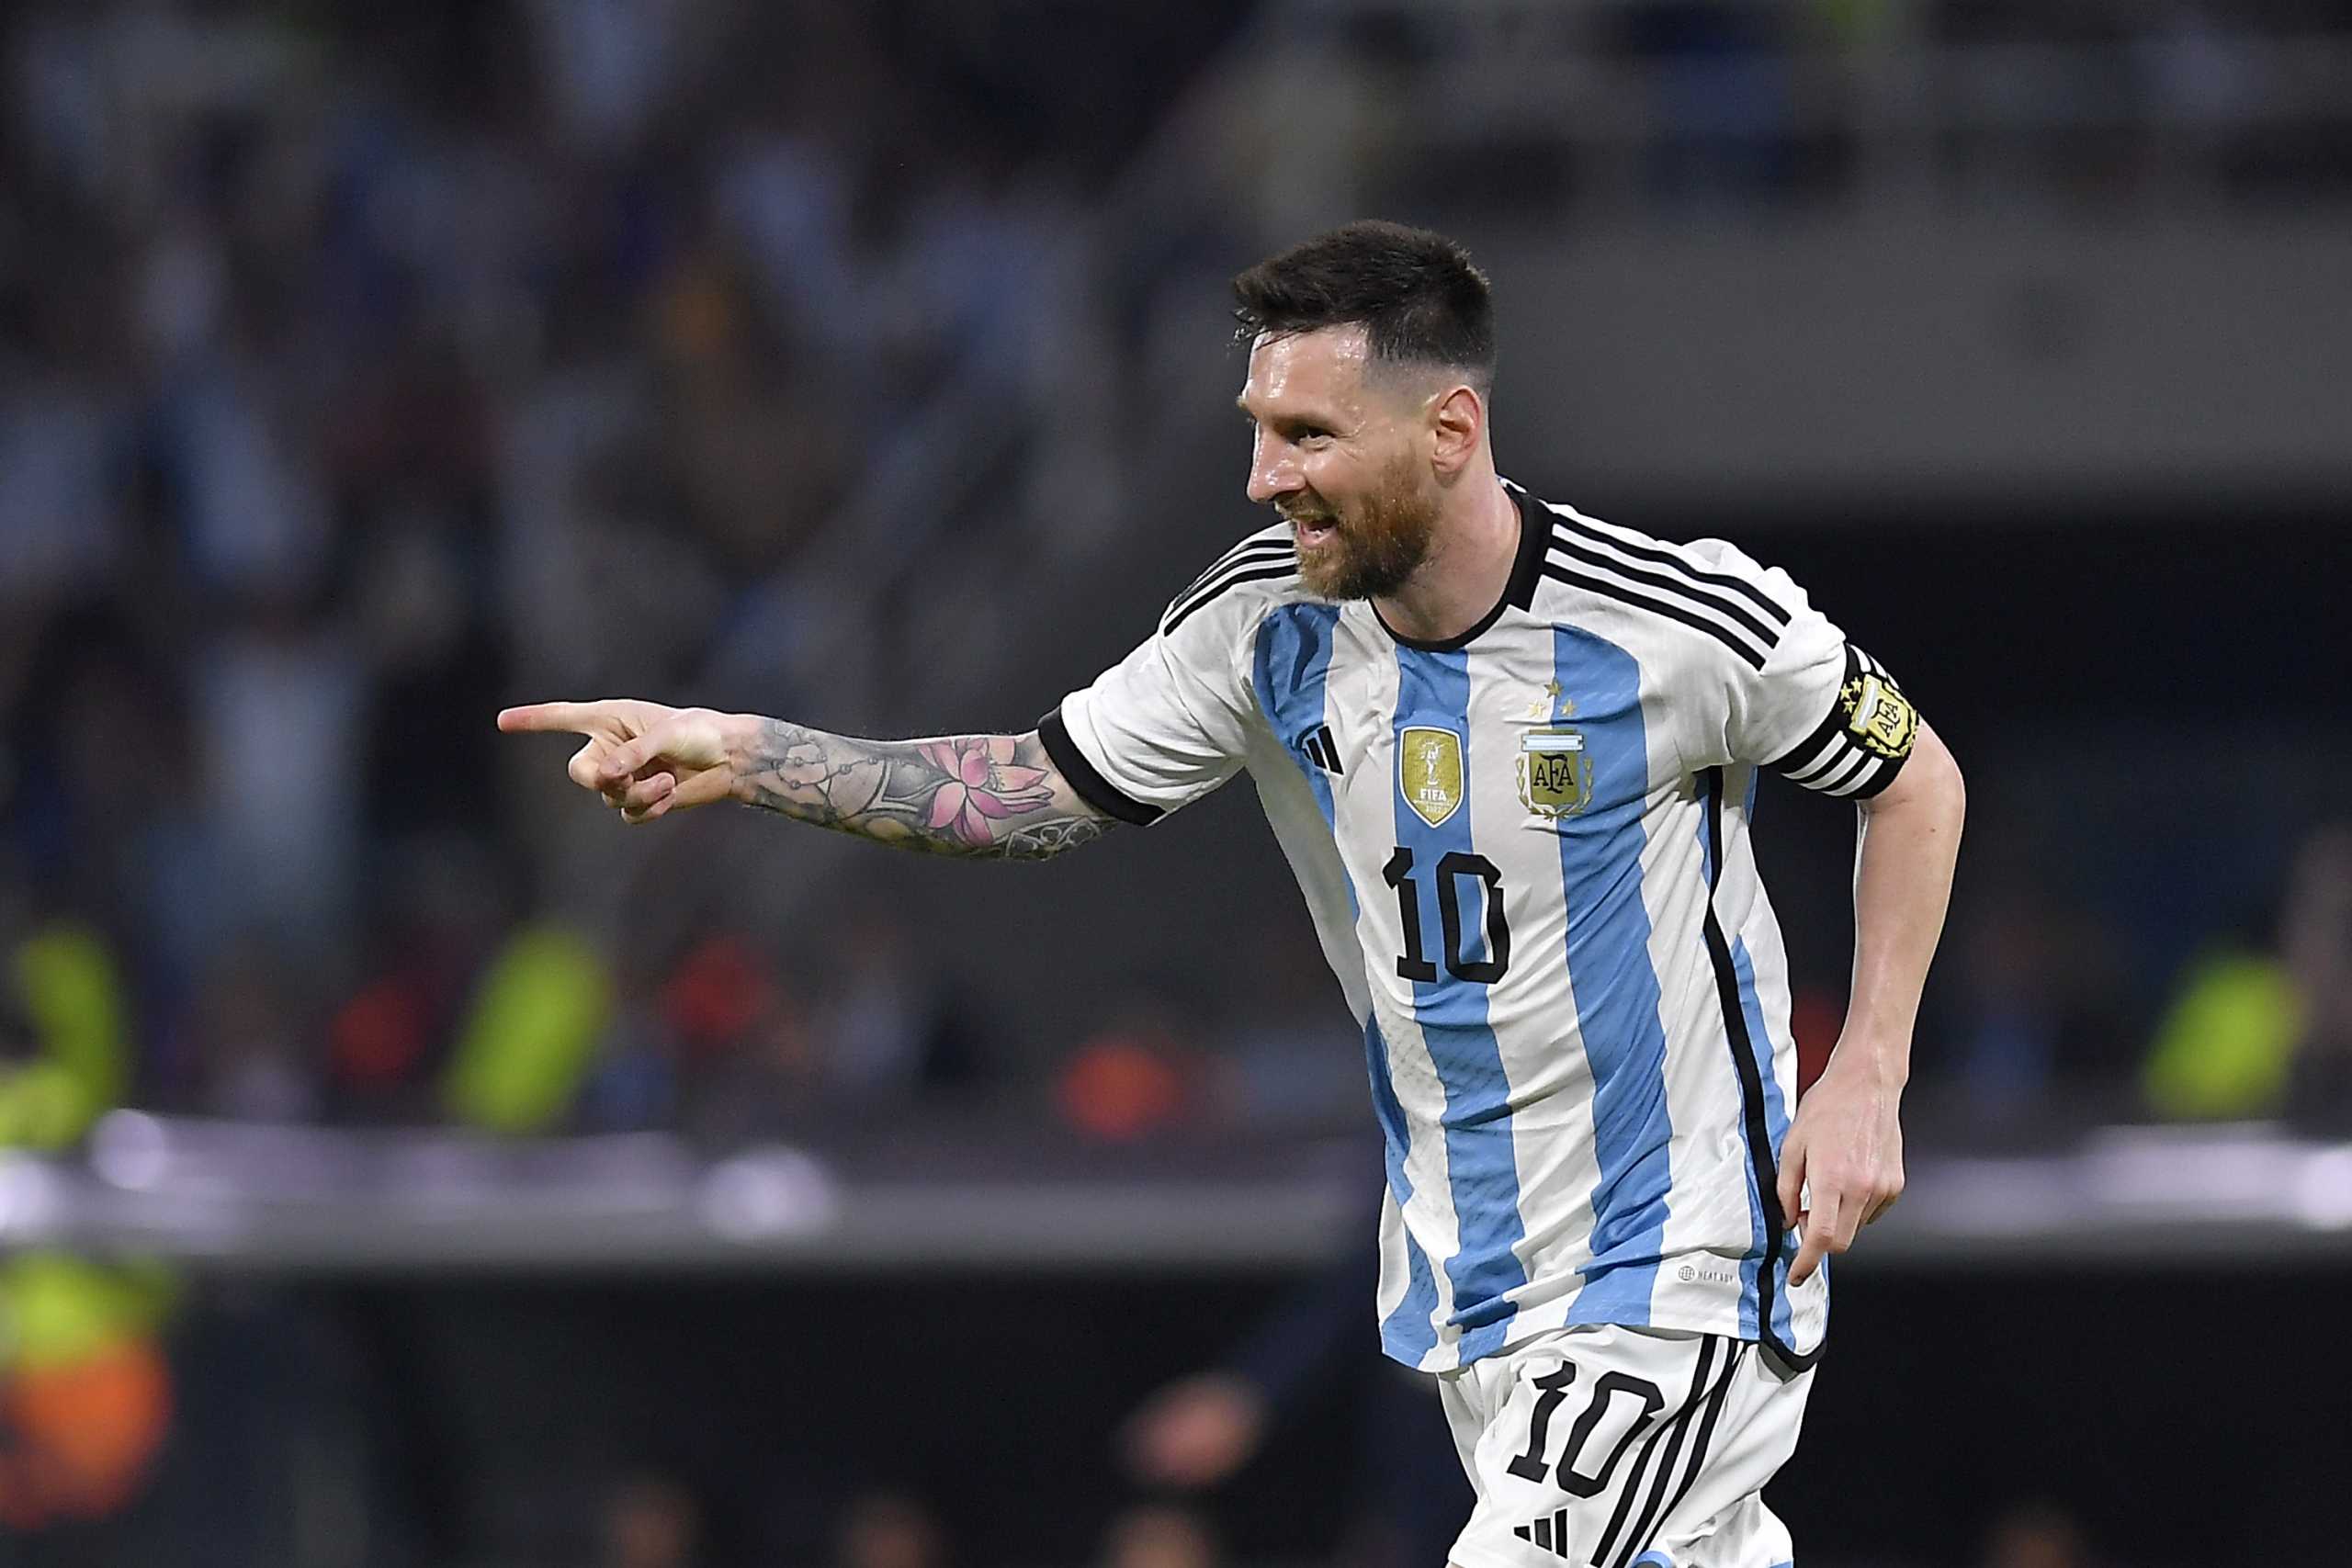 Lionel Messi has now scored more than 100 international goals for Argentina